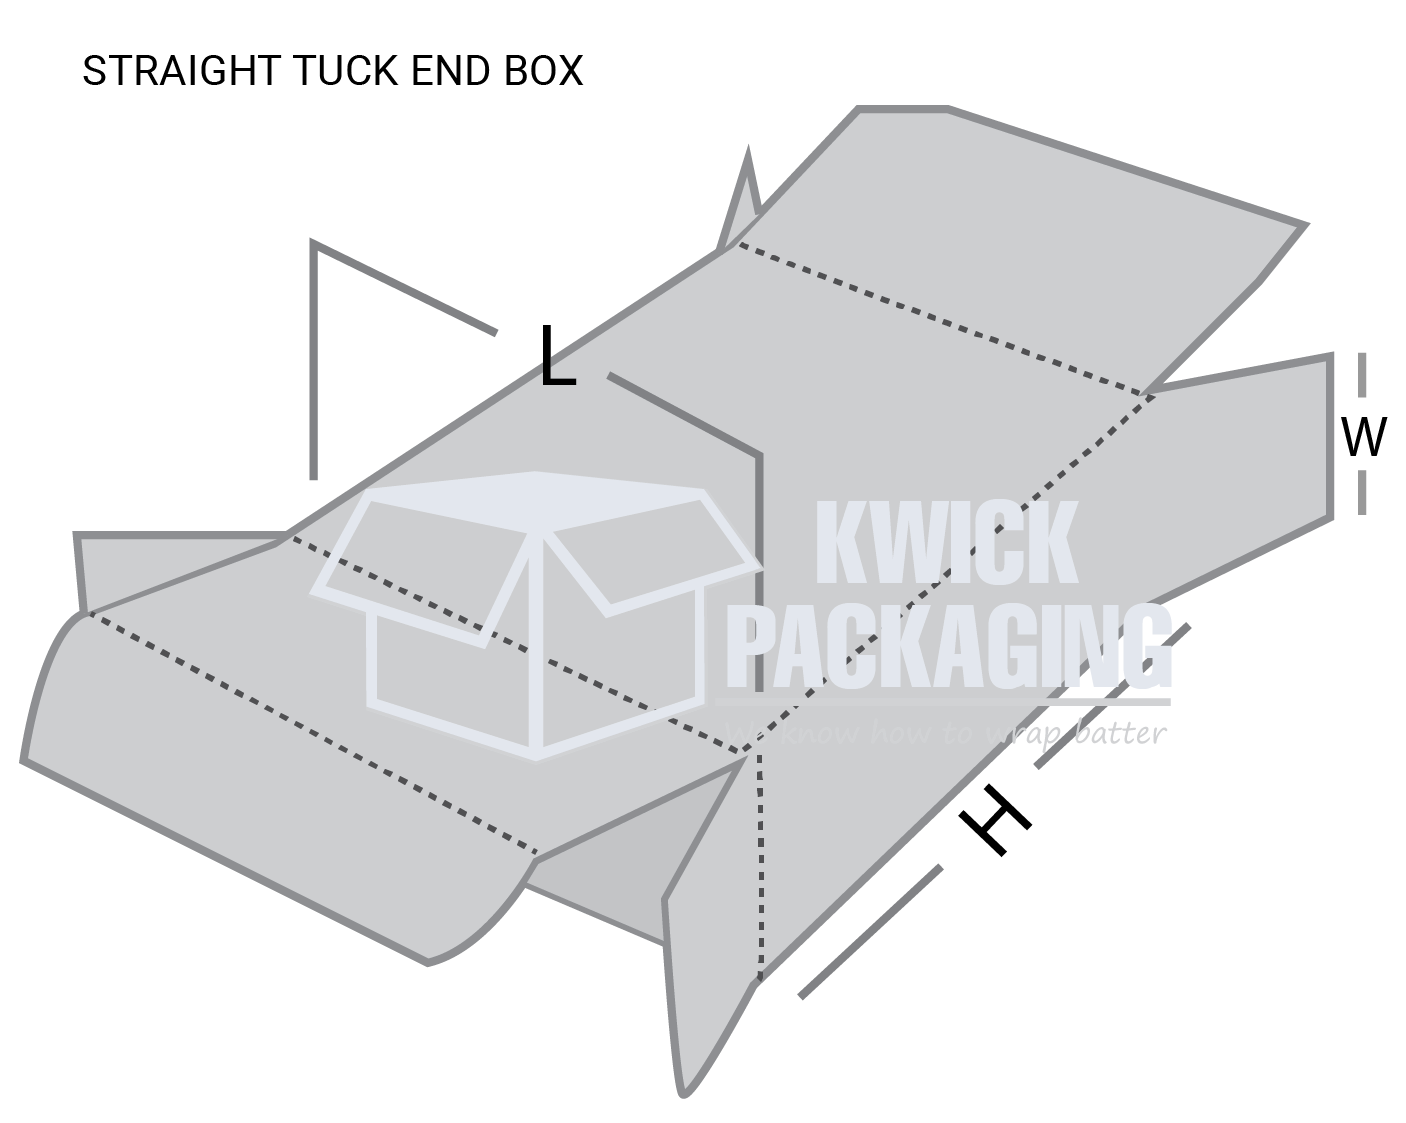 Straight_tuck_packaging_boxes_-_Kwick_Packaging.png